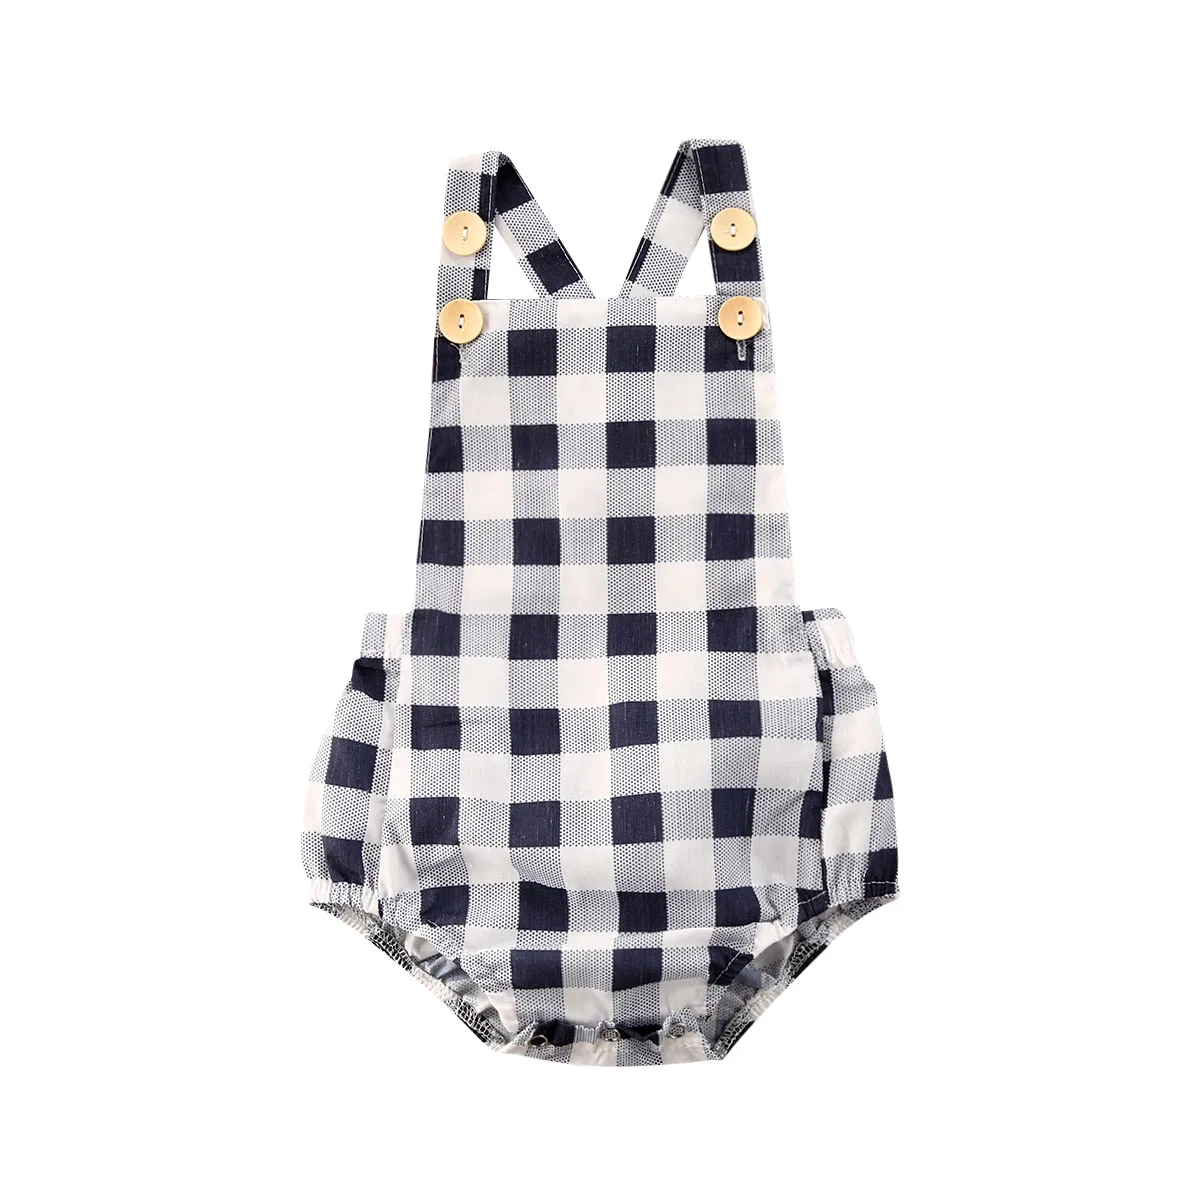 Newborn Infant Baby Boy Girl Romper Summer Button Jumpsuit Plaid Casual Sleeveless Backless Cotton Outfits Clothes Cotton baby suit Baby Rompers